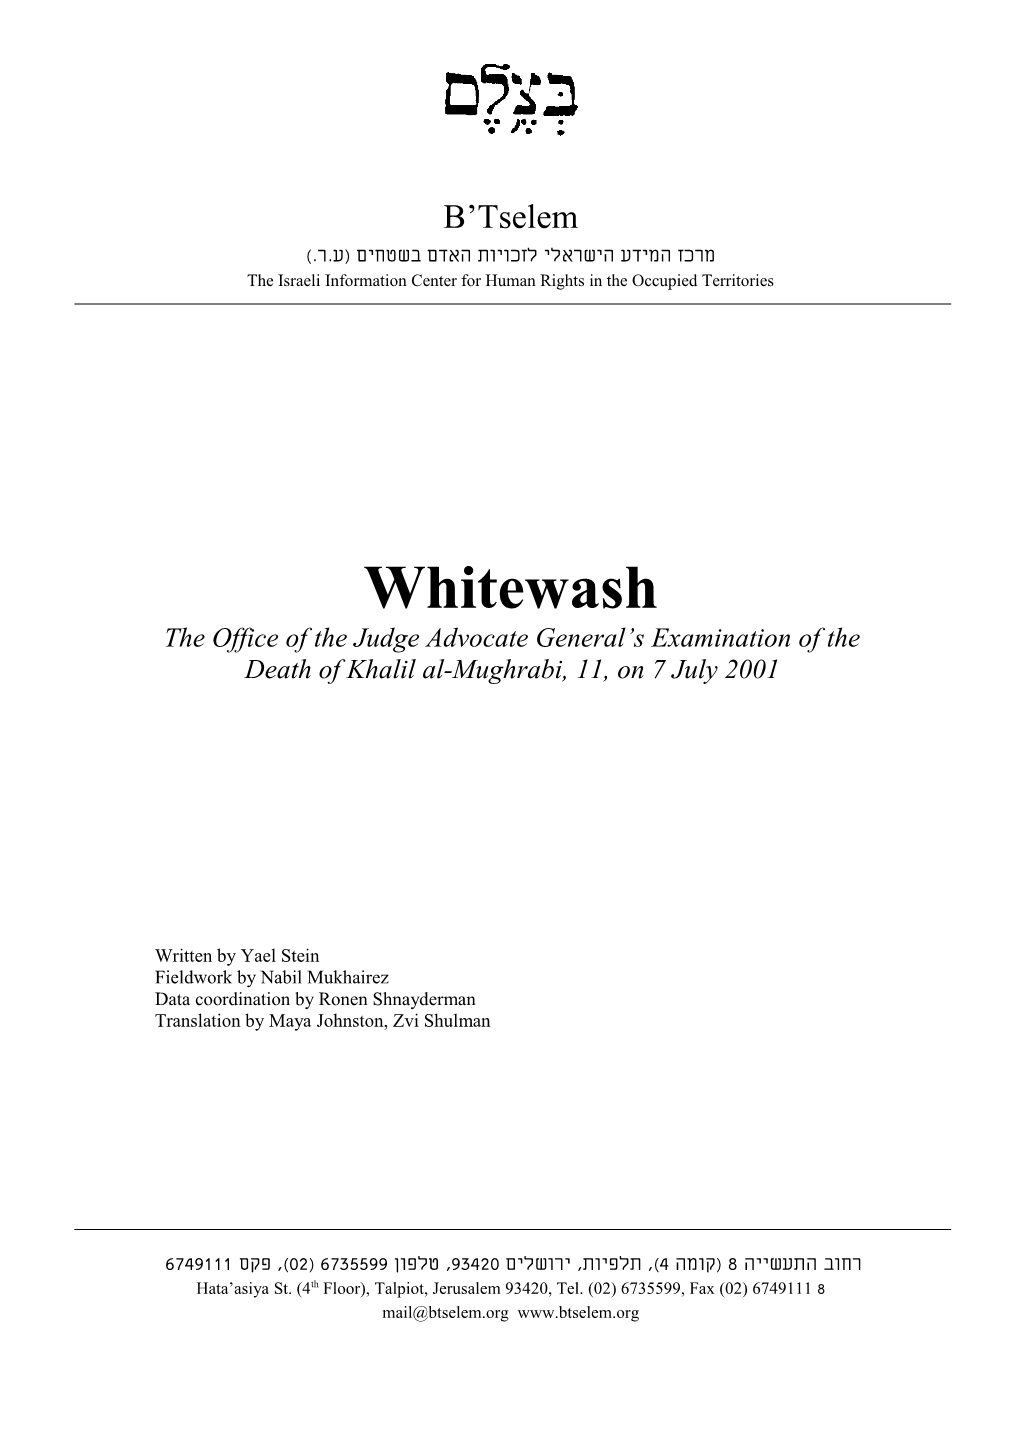 Whitewash: the Office of the Judge Advocate General's Examination of the Death of Khalil